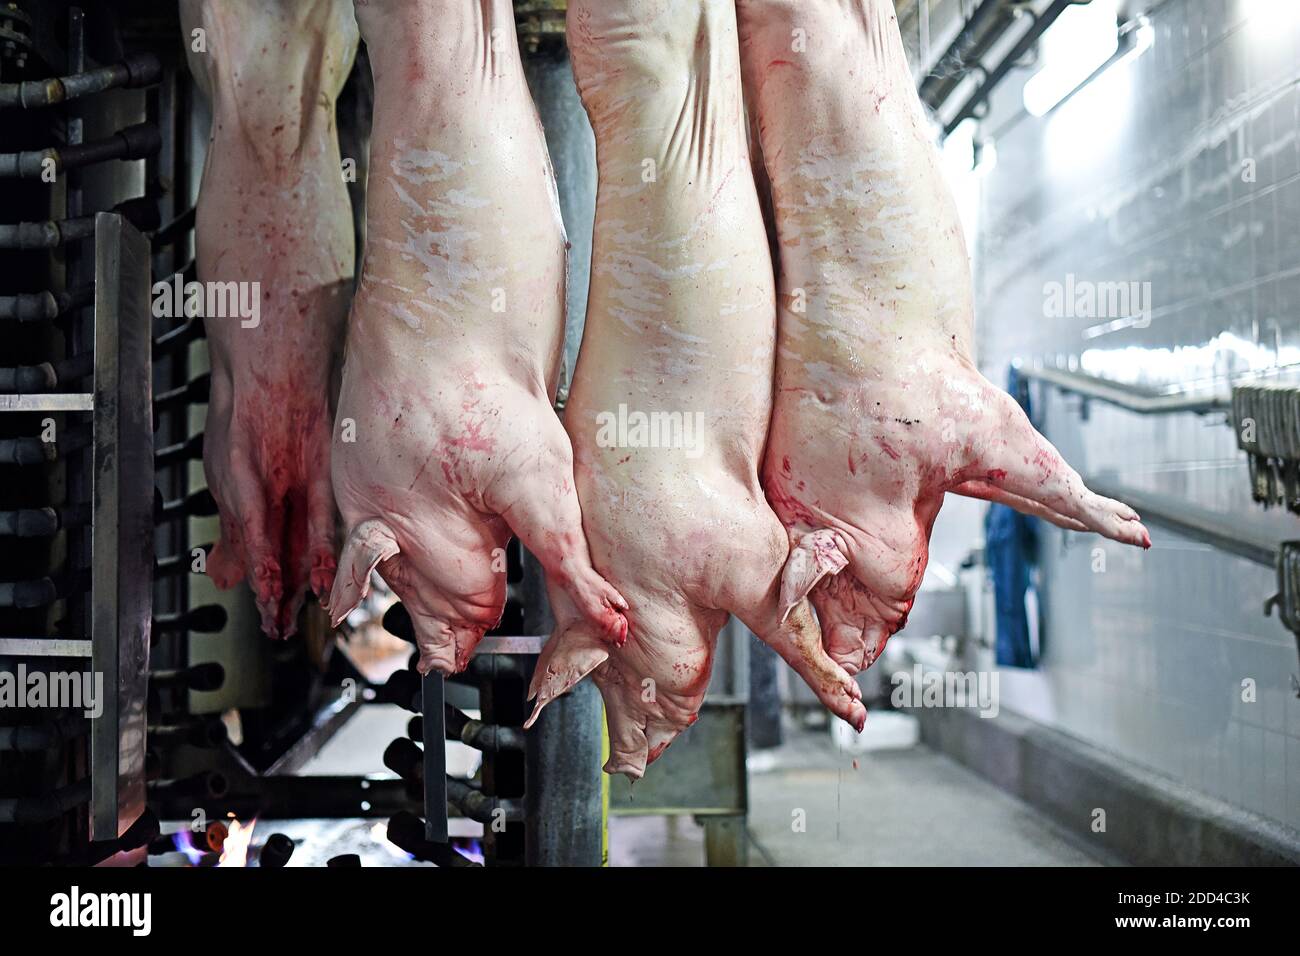 Pork carcasses are processed at the factory. Meat production. A place where pigs are killed Stock Photo